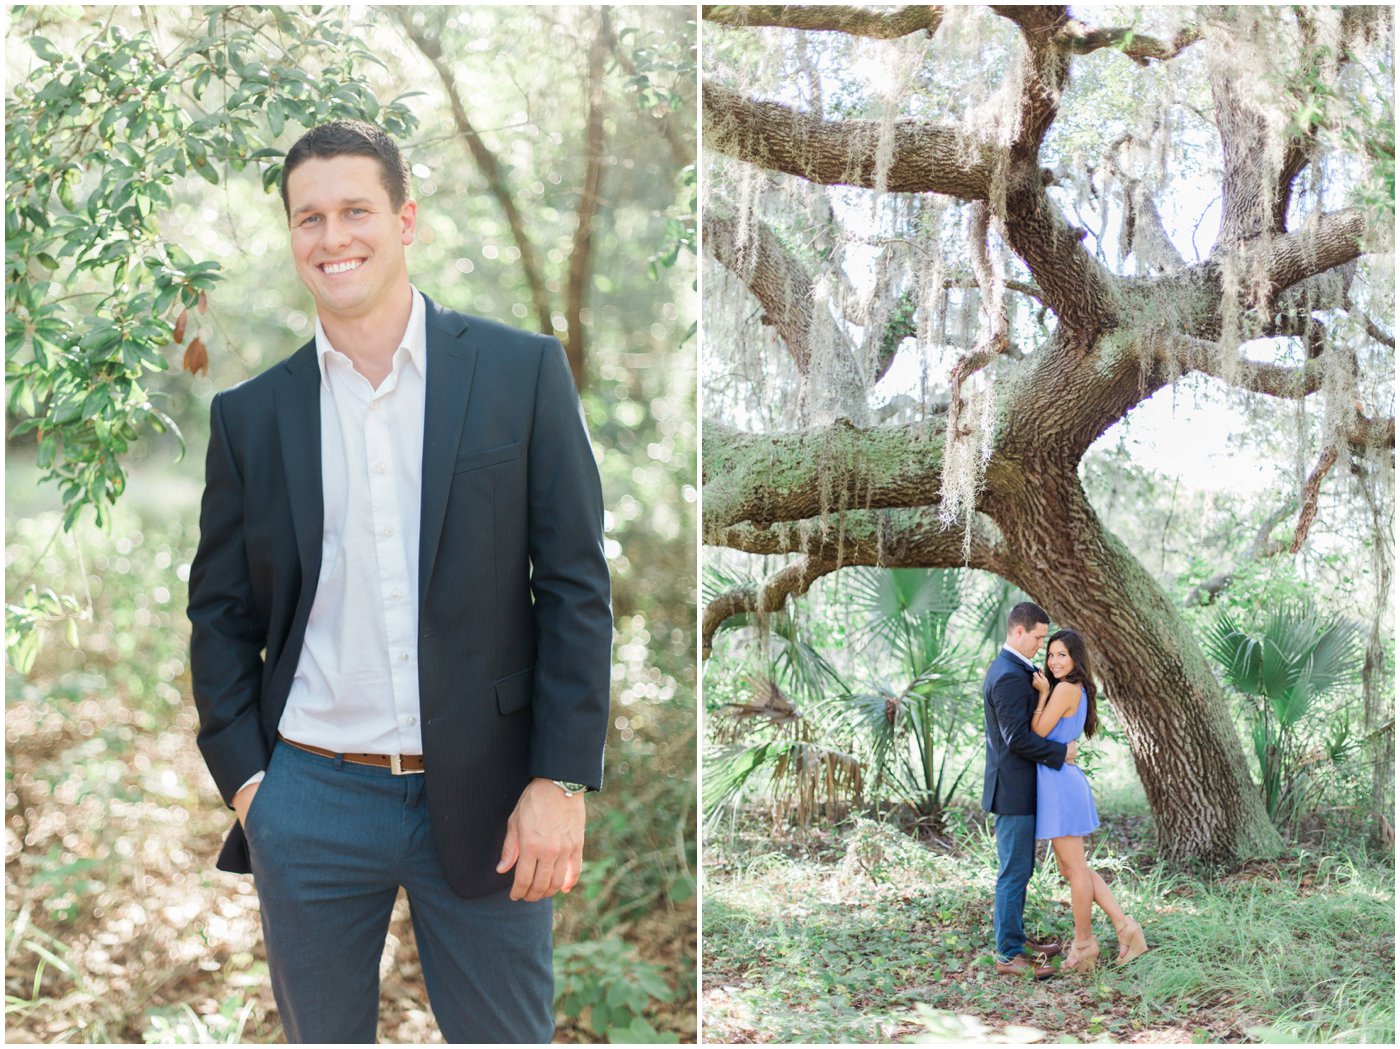 What to Wear for your Engagement Session, orlando wedding photographer, destination wedding photographer